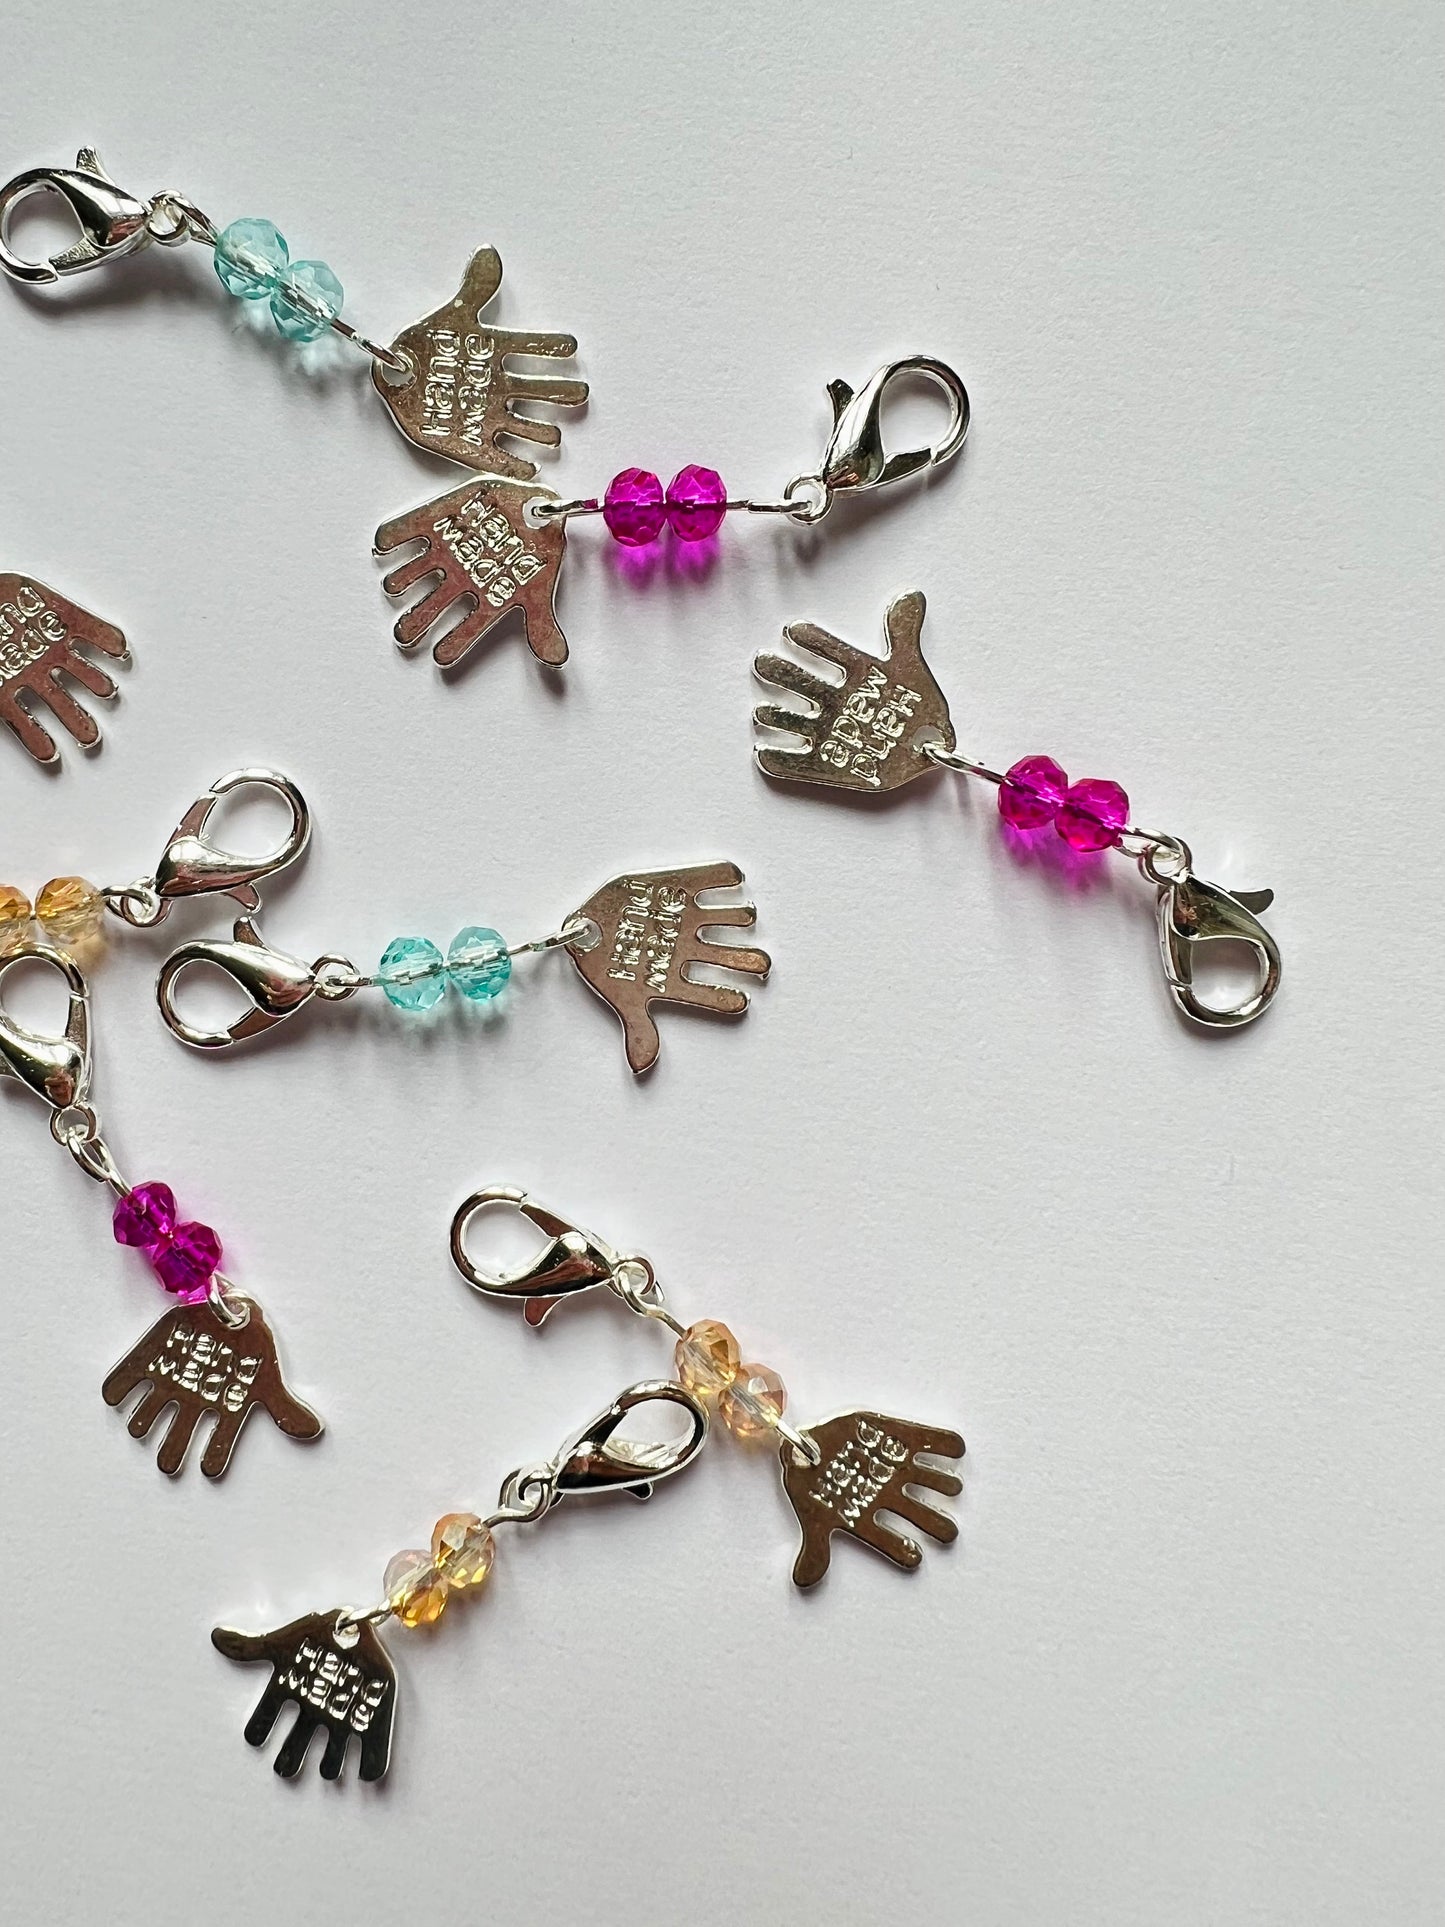 Handmade Crystal Charms Progress Keepers for Knitting & Crochet - The maker